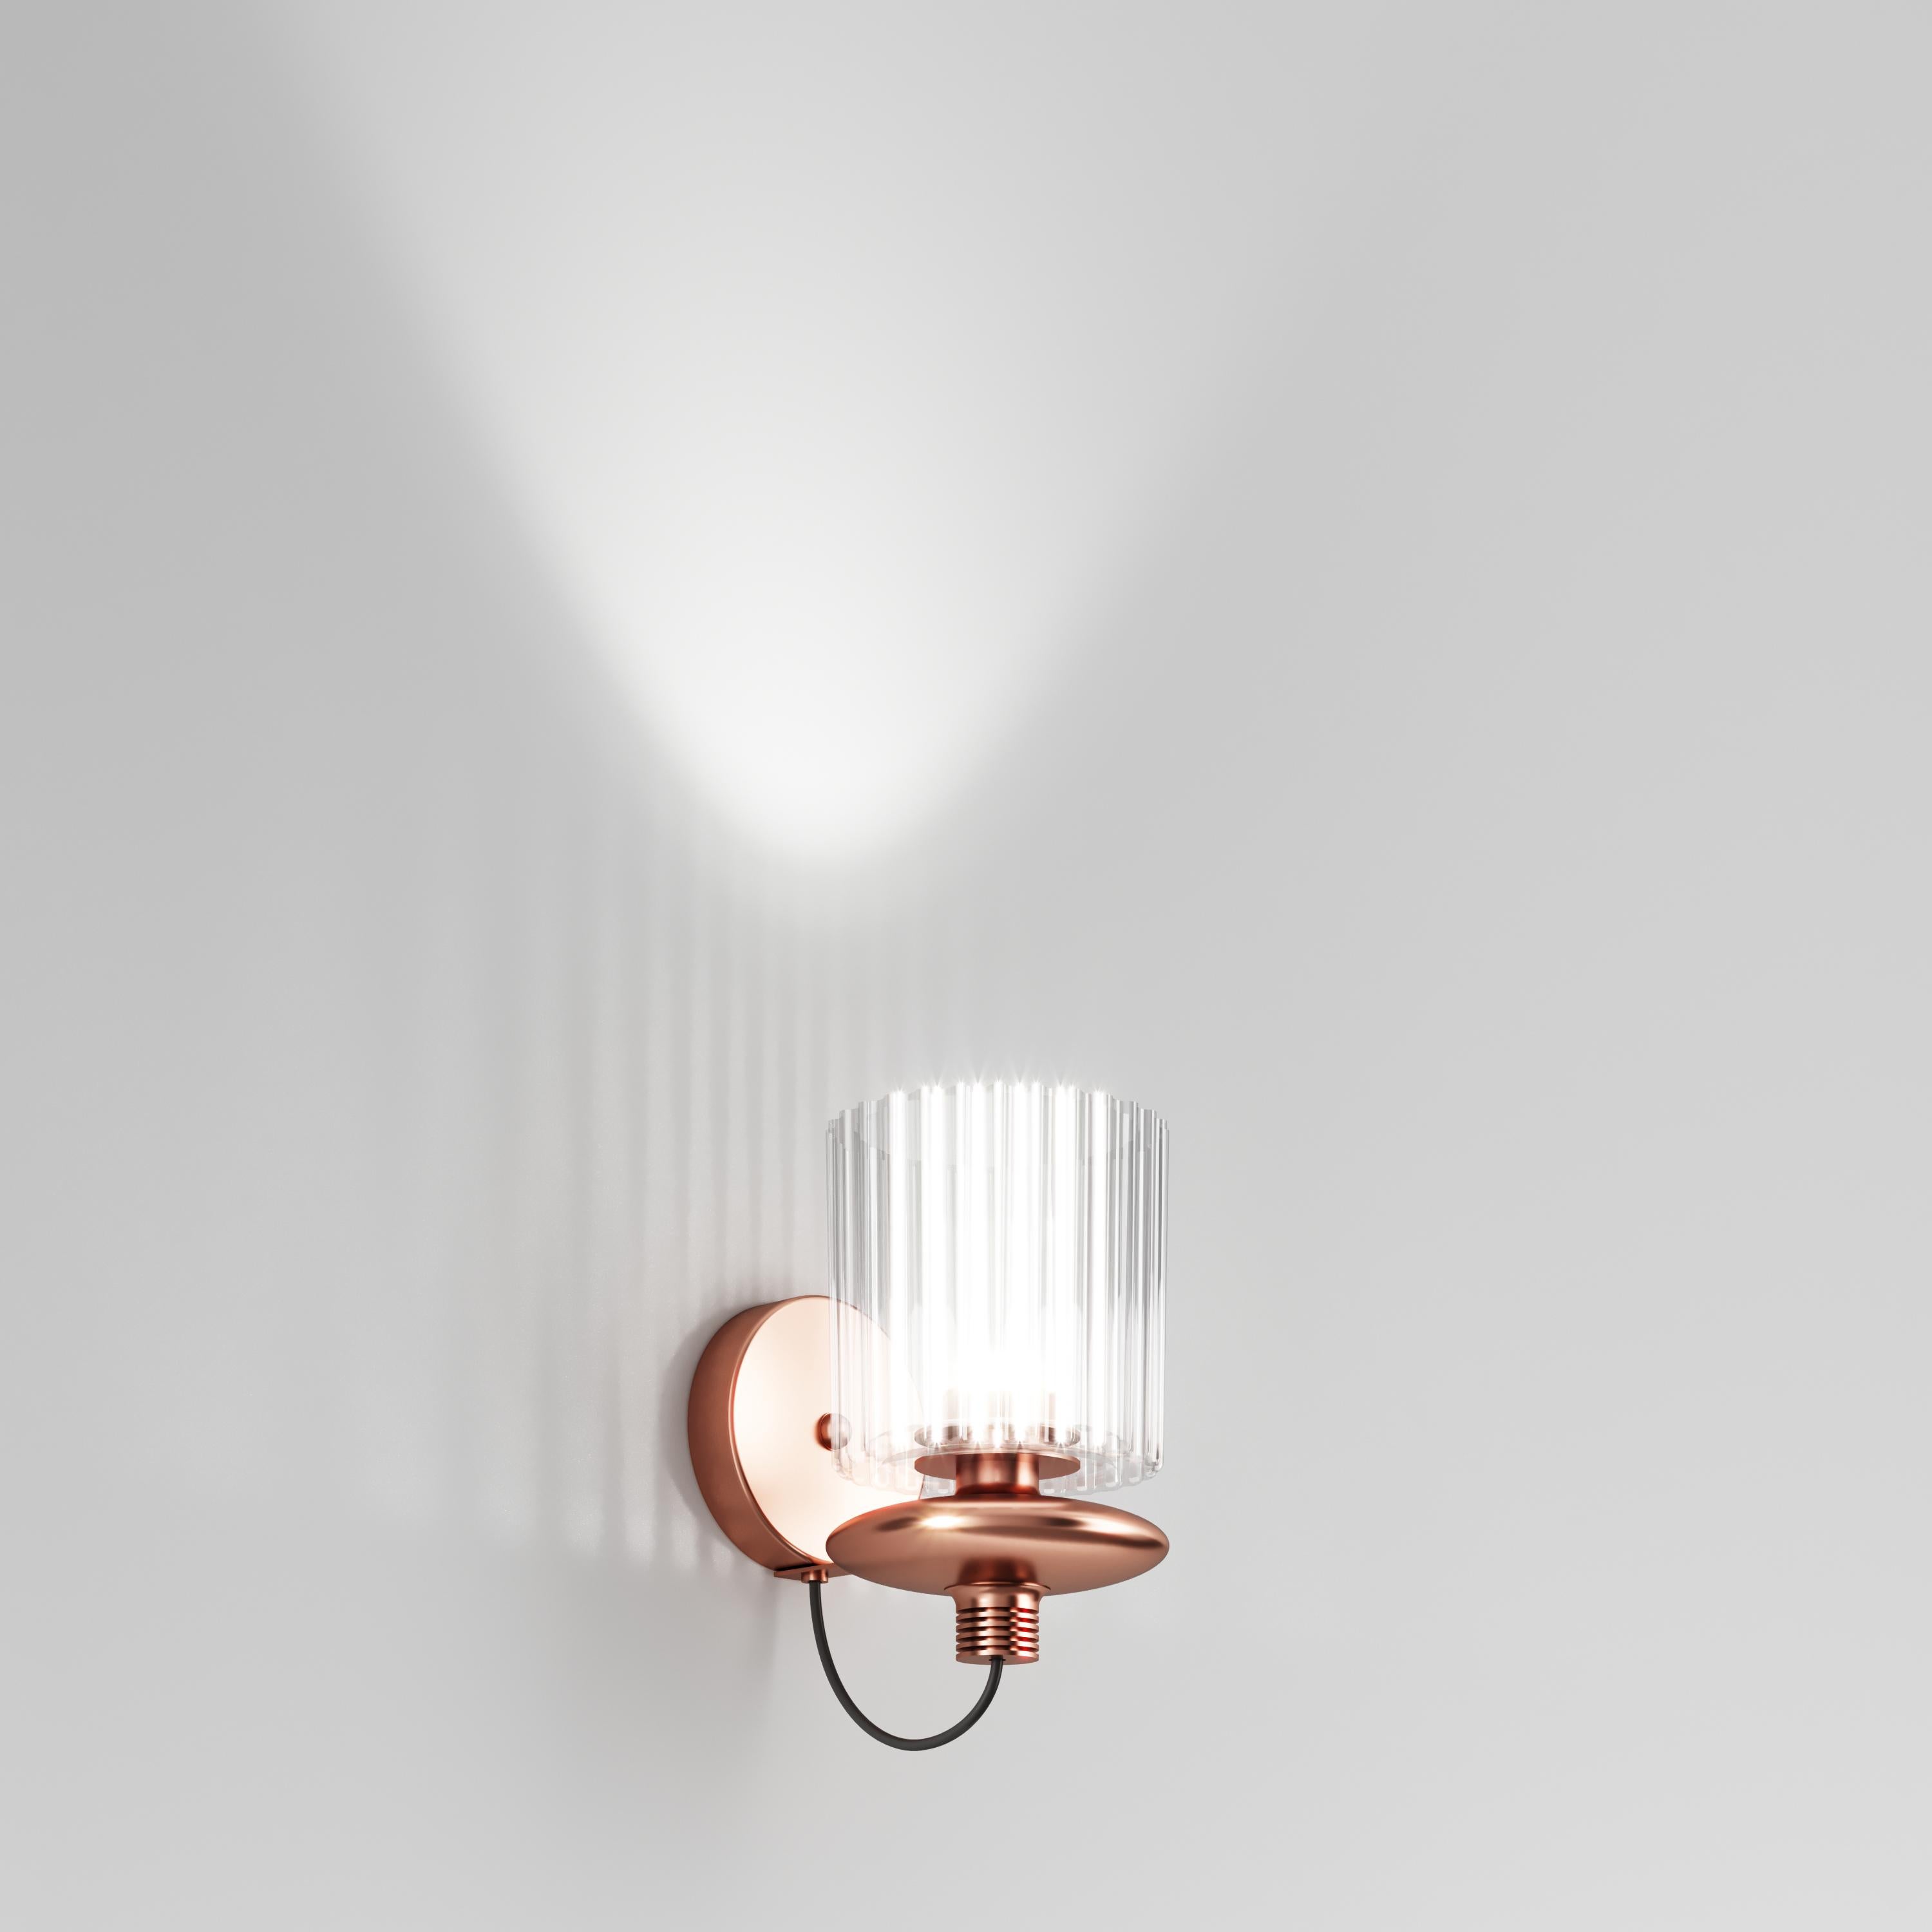 The “technicity” of the metal element combined with the blown glass diffuser gives Tread an “industrial” style. An object reminiscent of vintage electrical equipment for its particular shape, in which the finned heat sink, combined with blown glass,